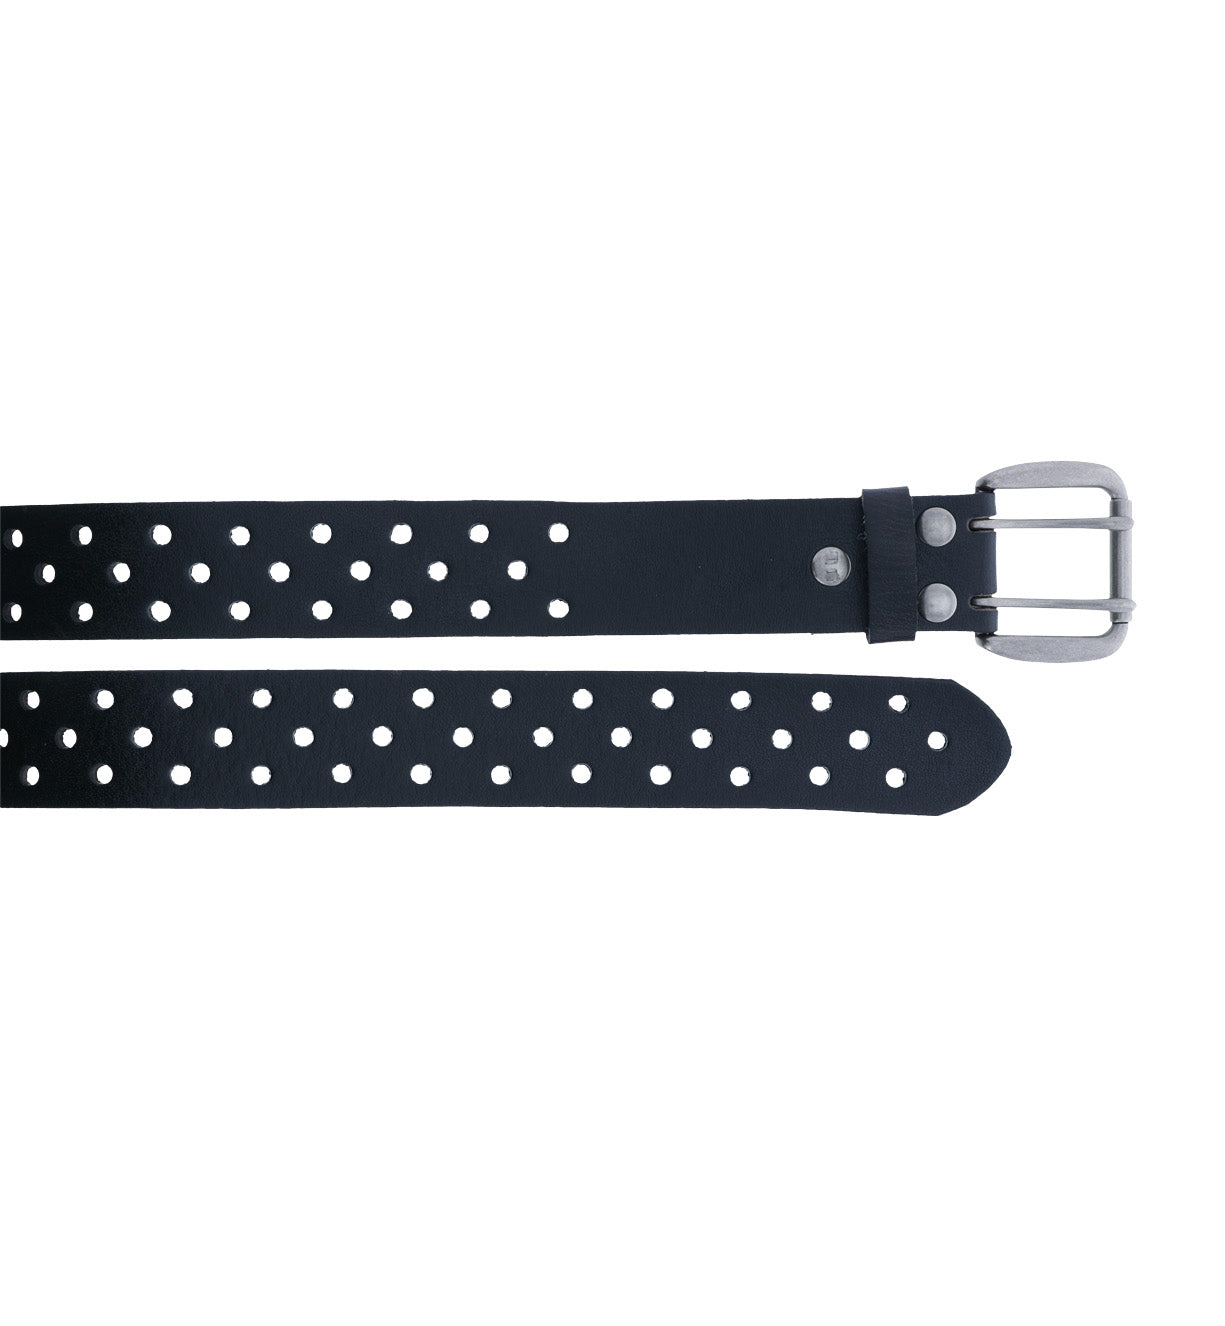 A black leather Mccoy belt with decorative perforation on it, made by Bed Stu.